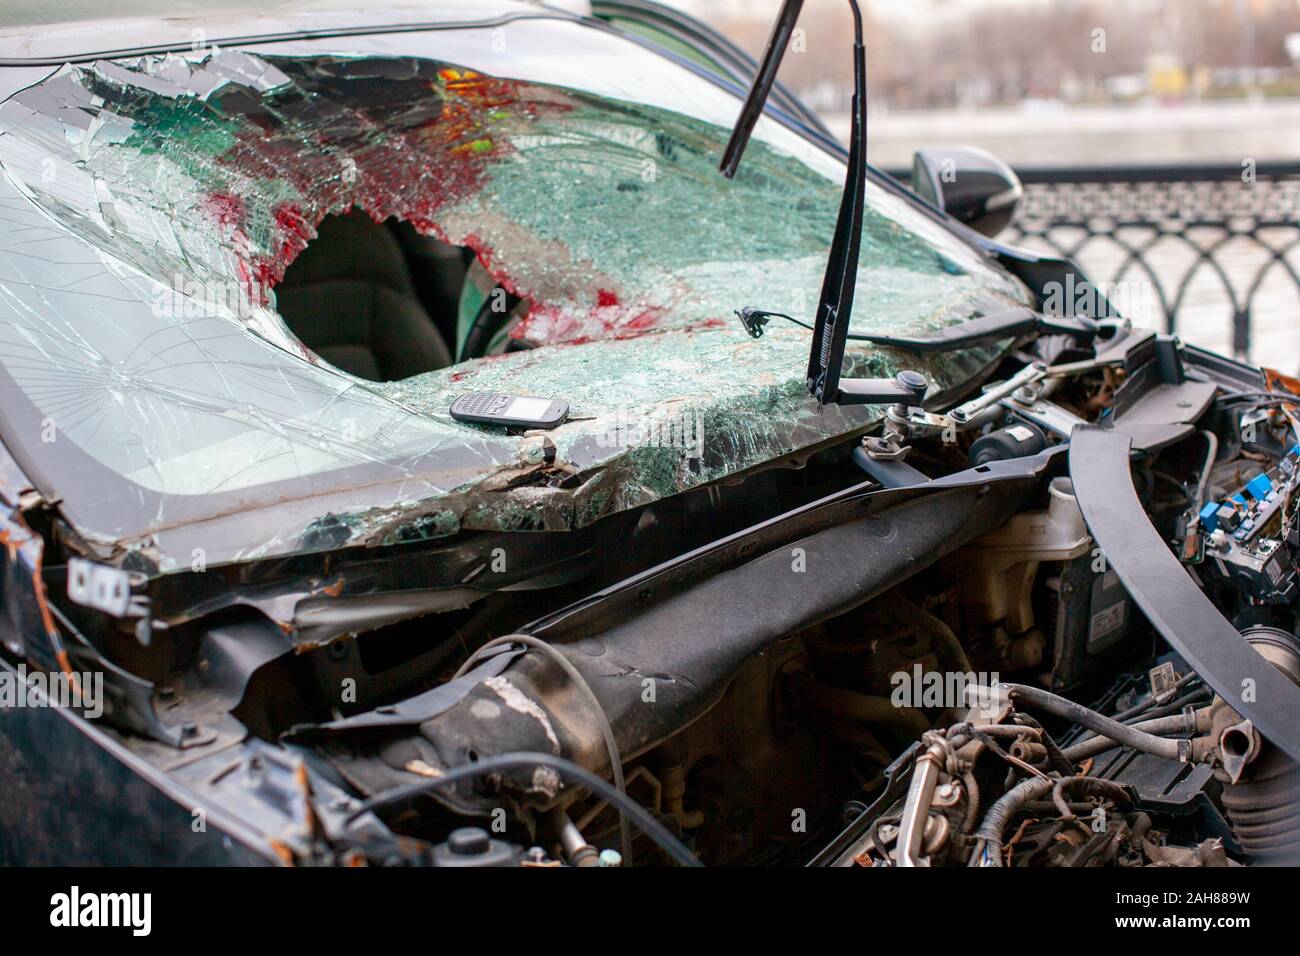 Broken car windshield after an accident with traces of blood and airbag. Stock Photo